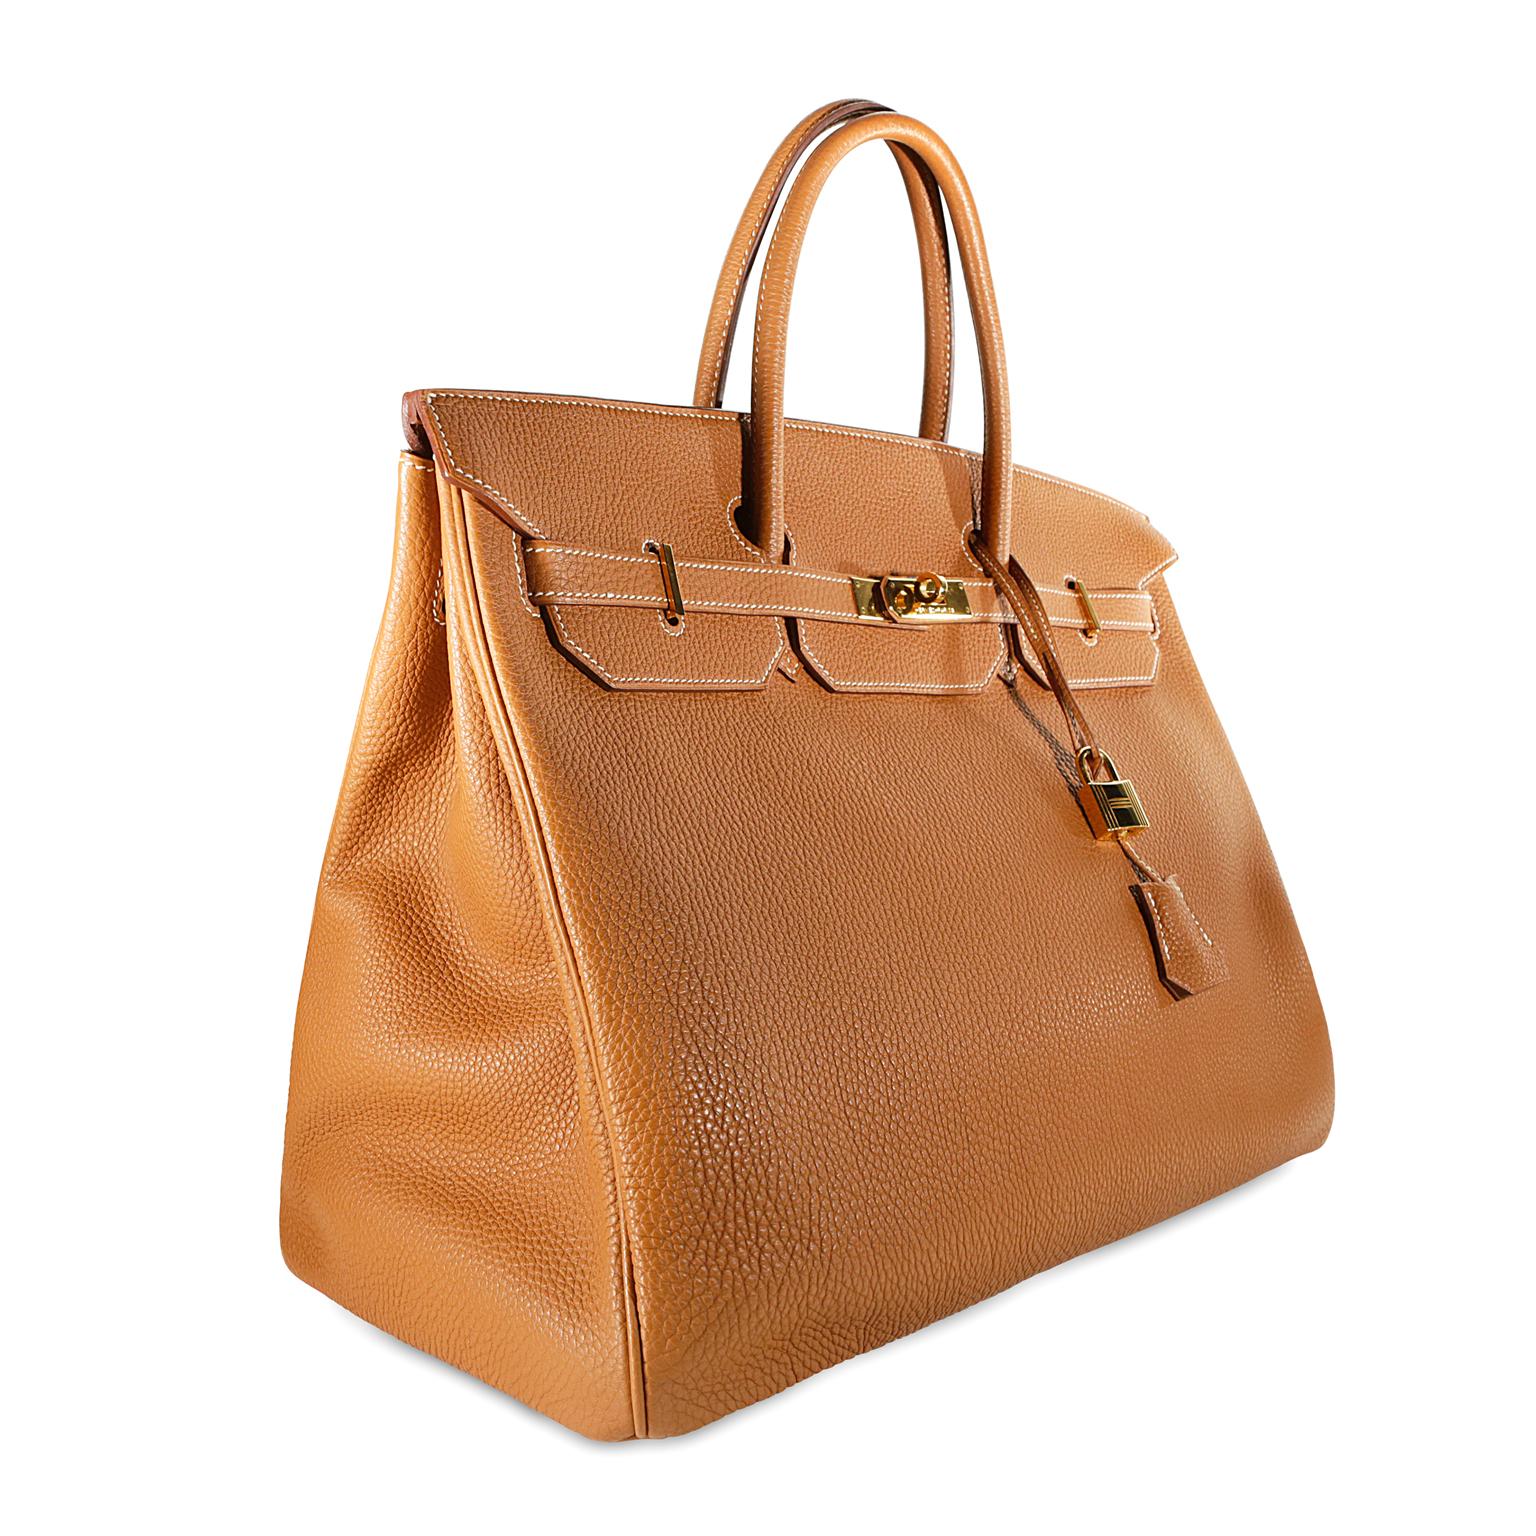 Hermès Gold Togo 40 cm Birkin - Excellent Plus Condition
Hand stitched by skilled craftsmen, wait lists of a year or more are not uncommon for the Hermès Birkin. They are considered the ultimate in luxury fashion. Classic Hermès Gold is remarkably